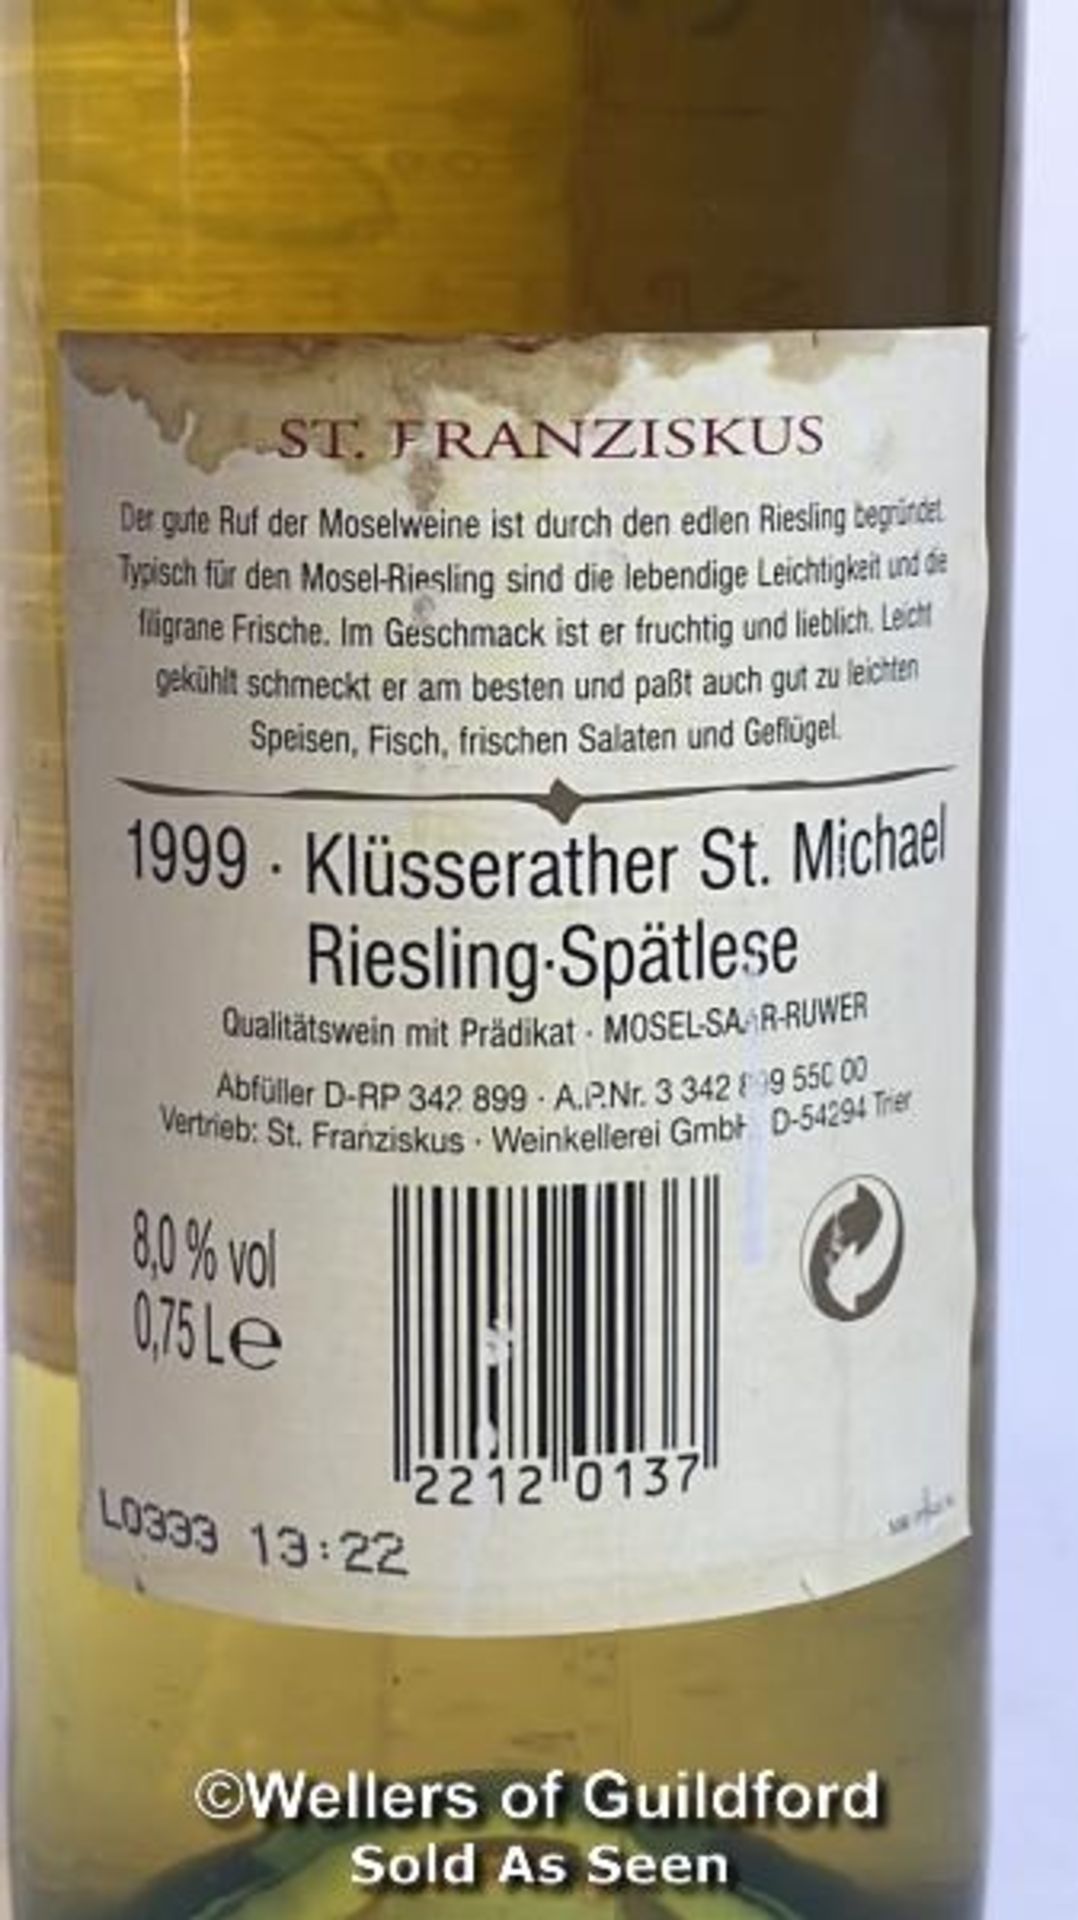 1999 Riesling Spatlese Klusserather St. Michael, 75cl, 8% vol / Please see images for fill level and - Image 3 of 4